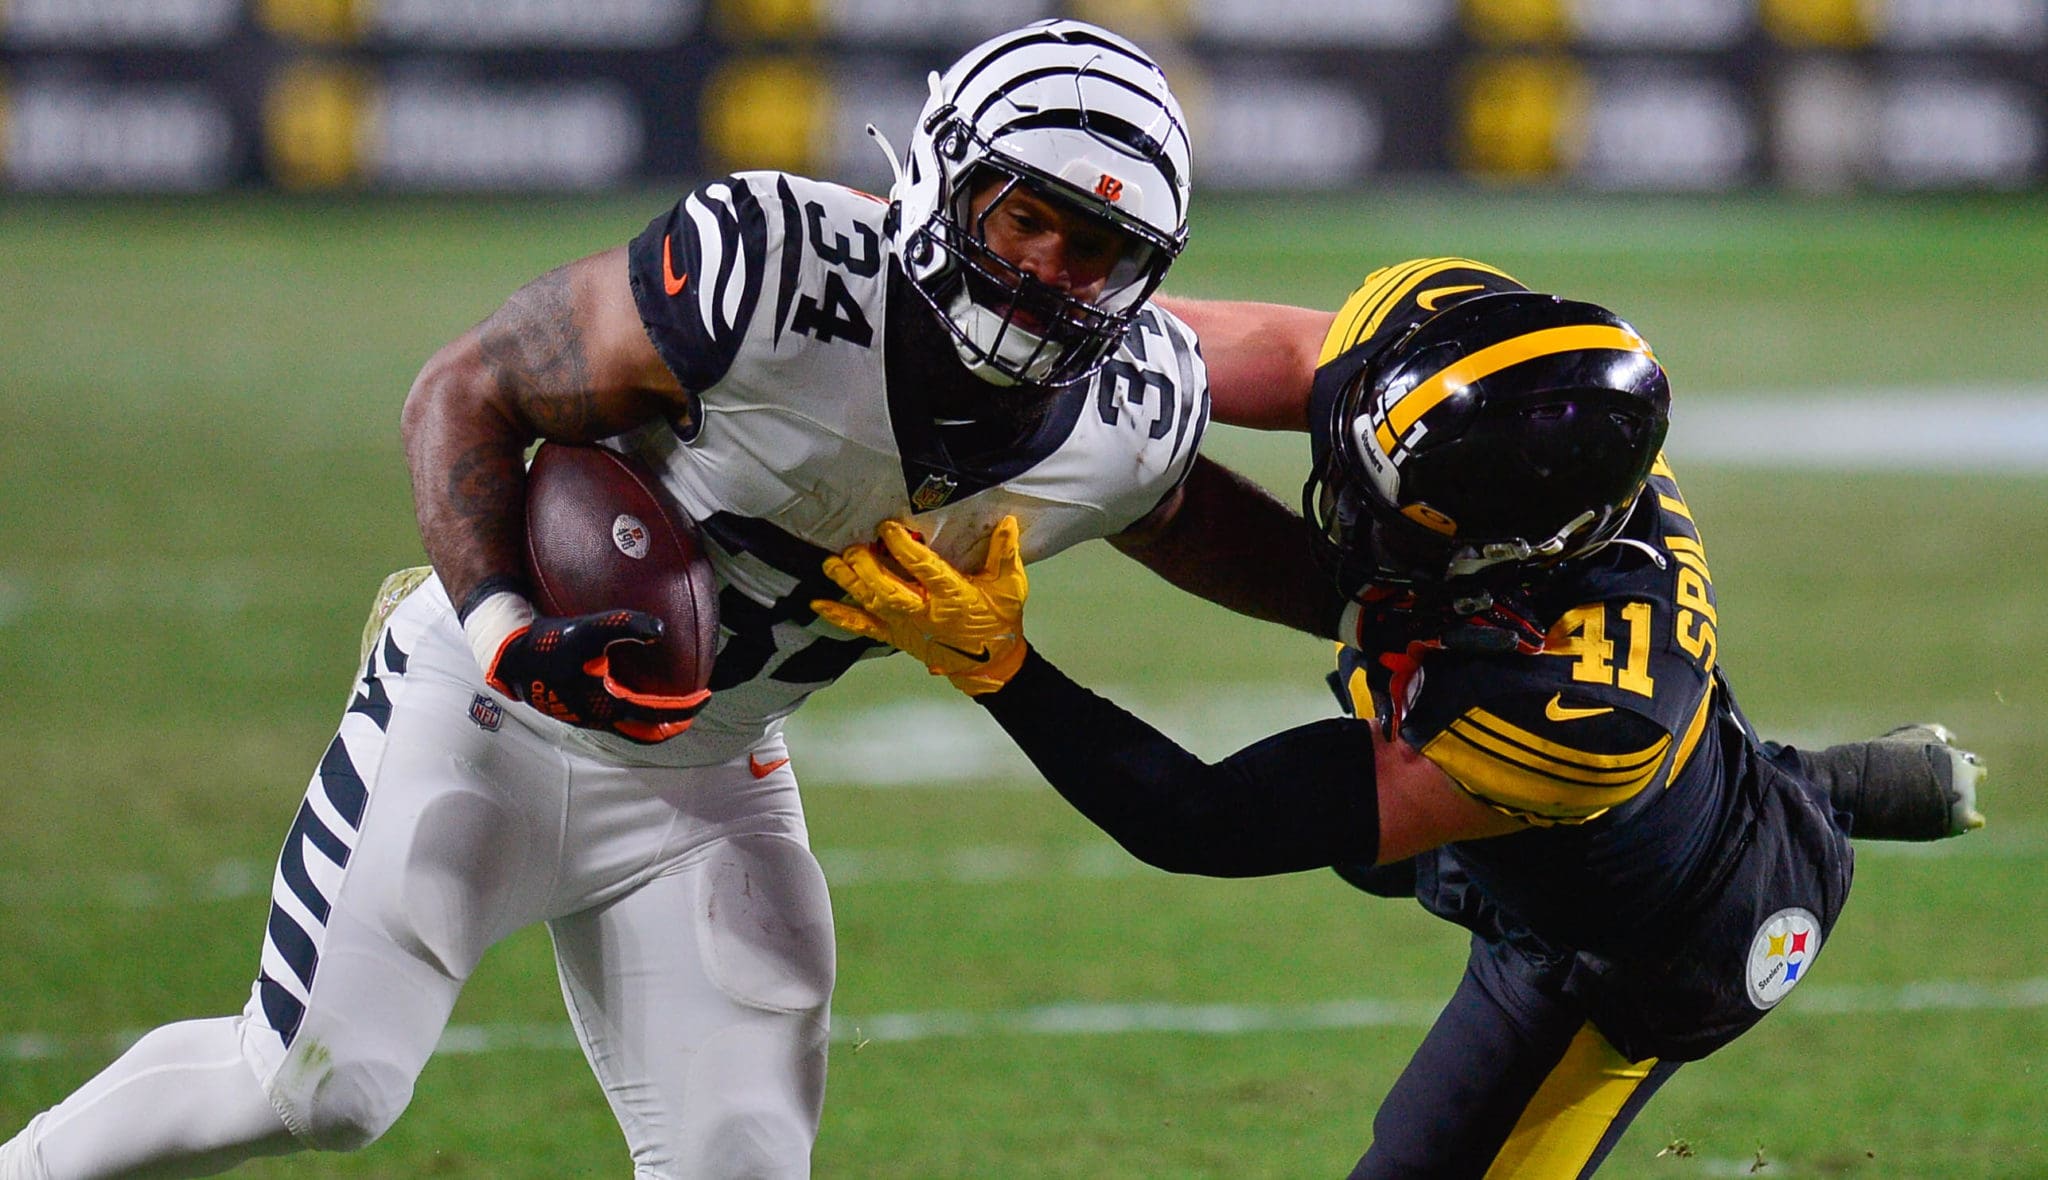 Burrow, Higgins, Perine Carve Up Steelers for 37-30 Bengals Win